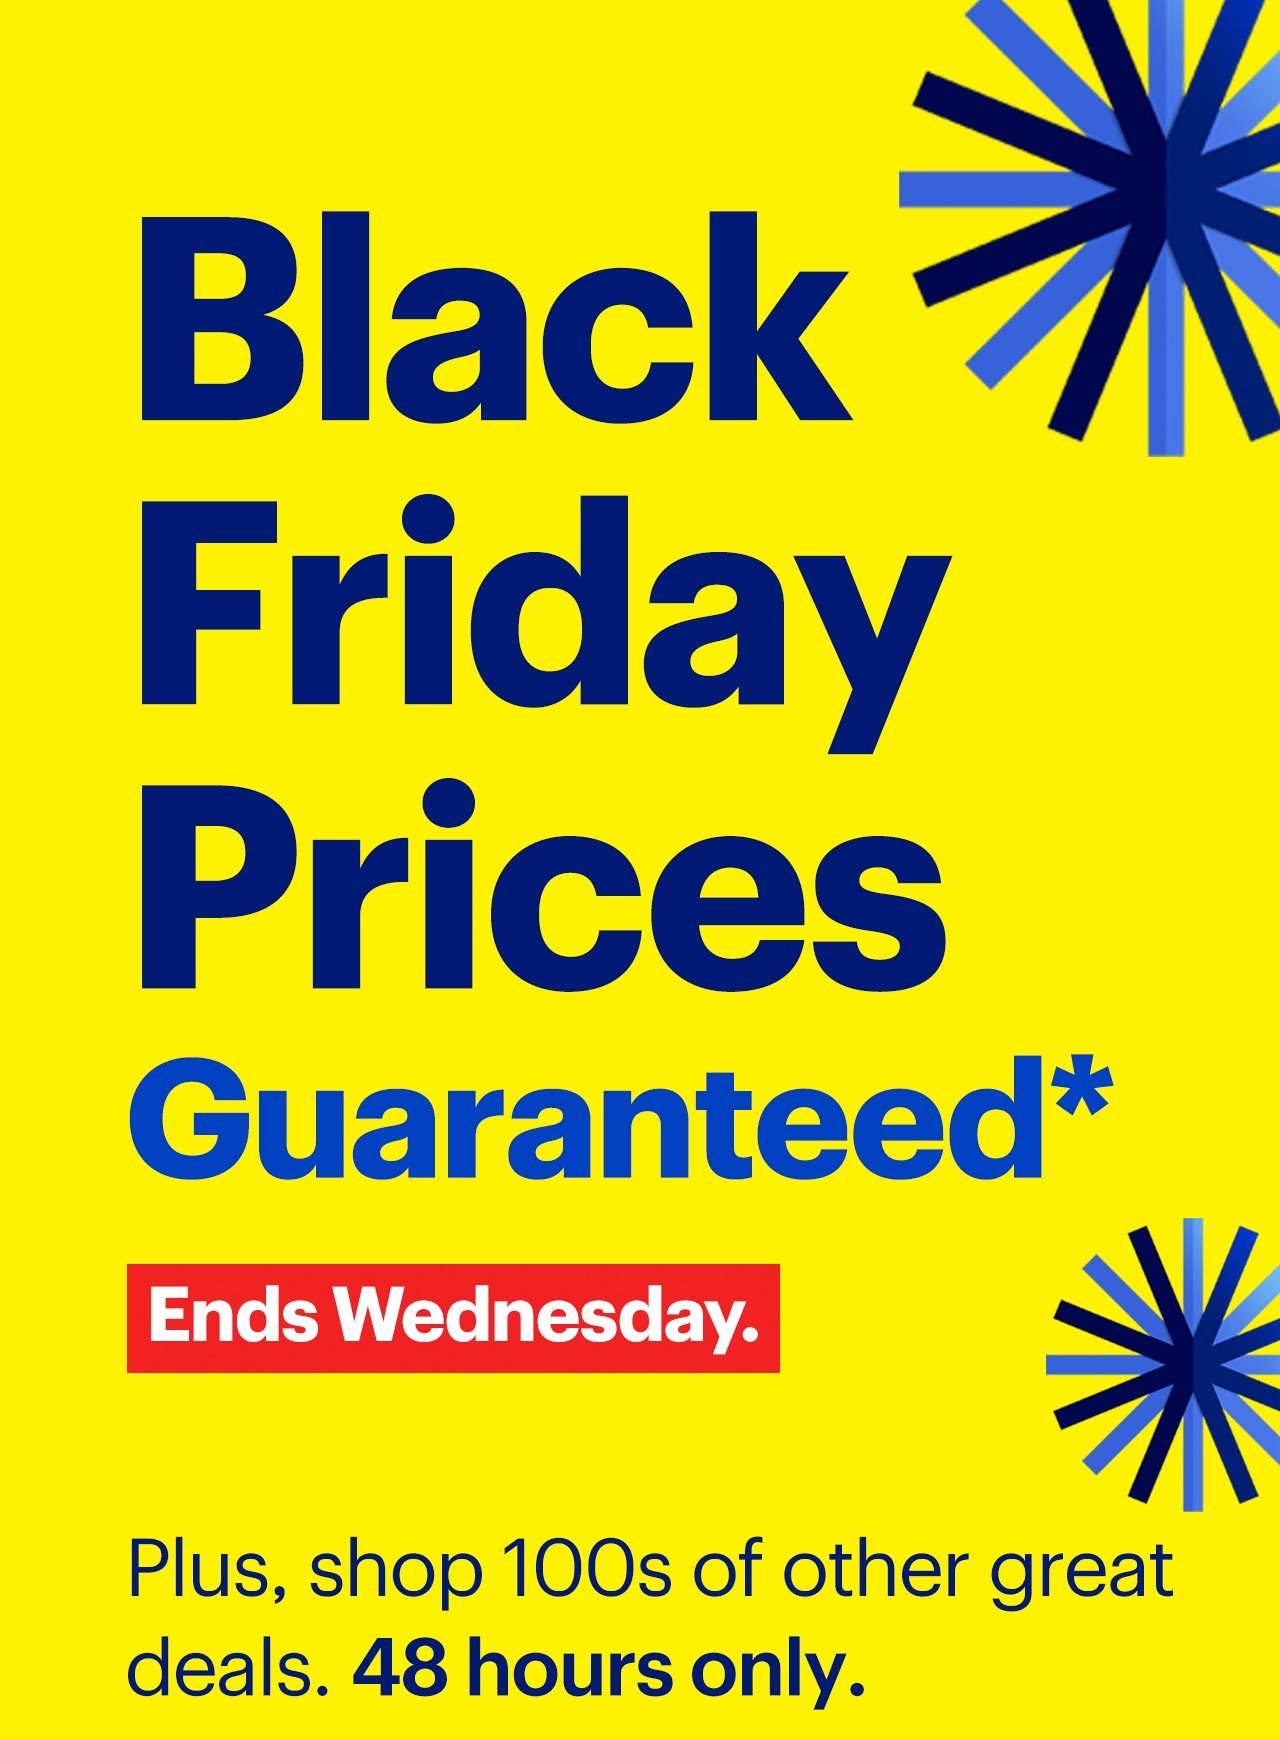 Black Friday Prices Guaranteed. Plus, shop 100s of other great deals. 48 hours only. Reference disclaimer.